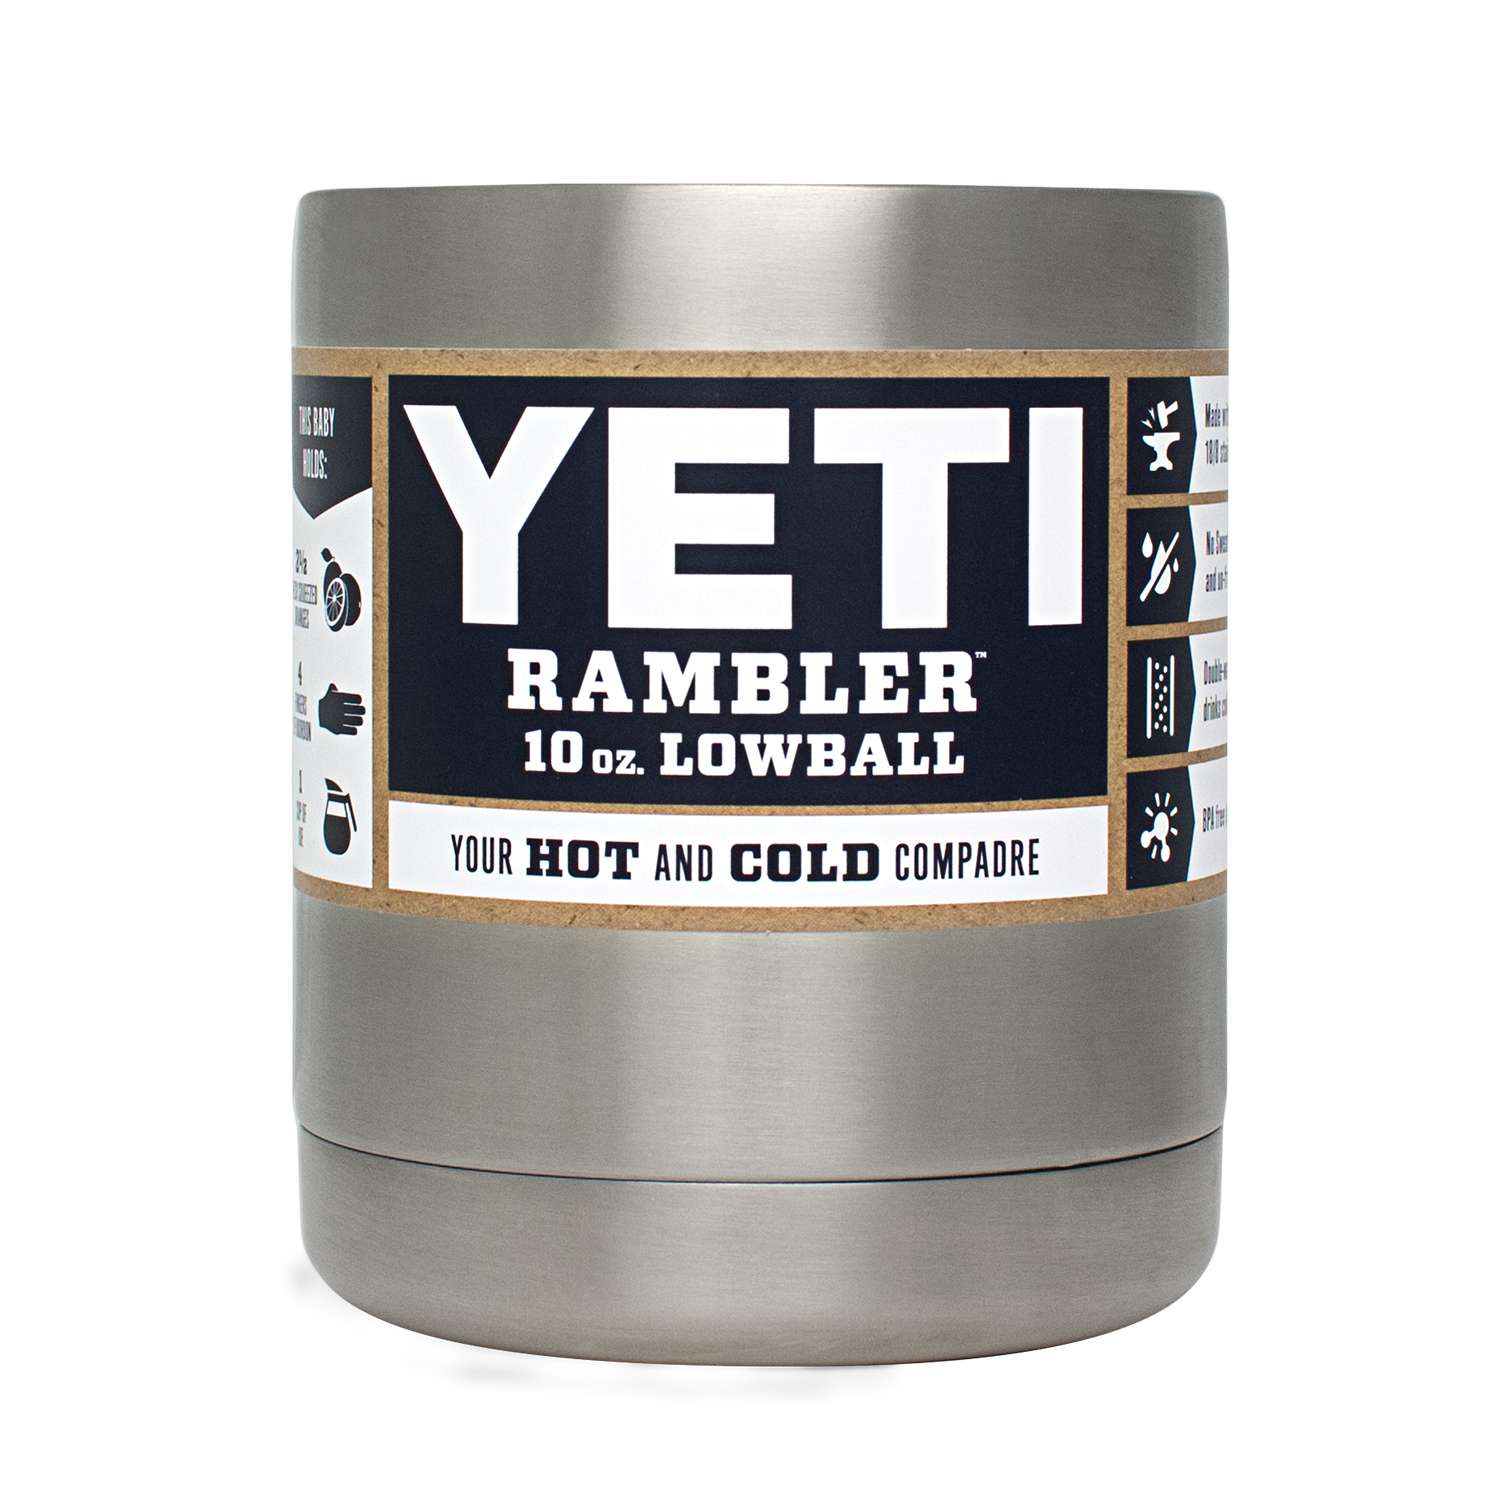 <b>YETI</b><br>	Rambler Lowball<br>	The YETI Rambler Lowball can hold 10 ounces of hot morning coffee or an old-fashioned nightcap. The YETI Lowball is over-engineered with kitchen-grade 18/8 stainless steel and double-wall vacuum insulation. It features YETIâs No Sweat design to keep fingers dry and is compatible with a Rambler 20-ounce Tumbler lid (sold separately) for beverages on the go.